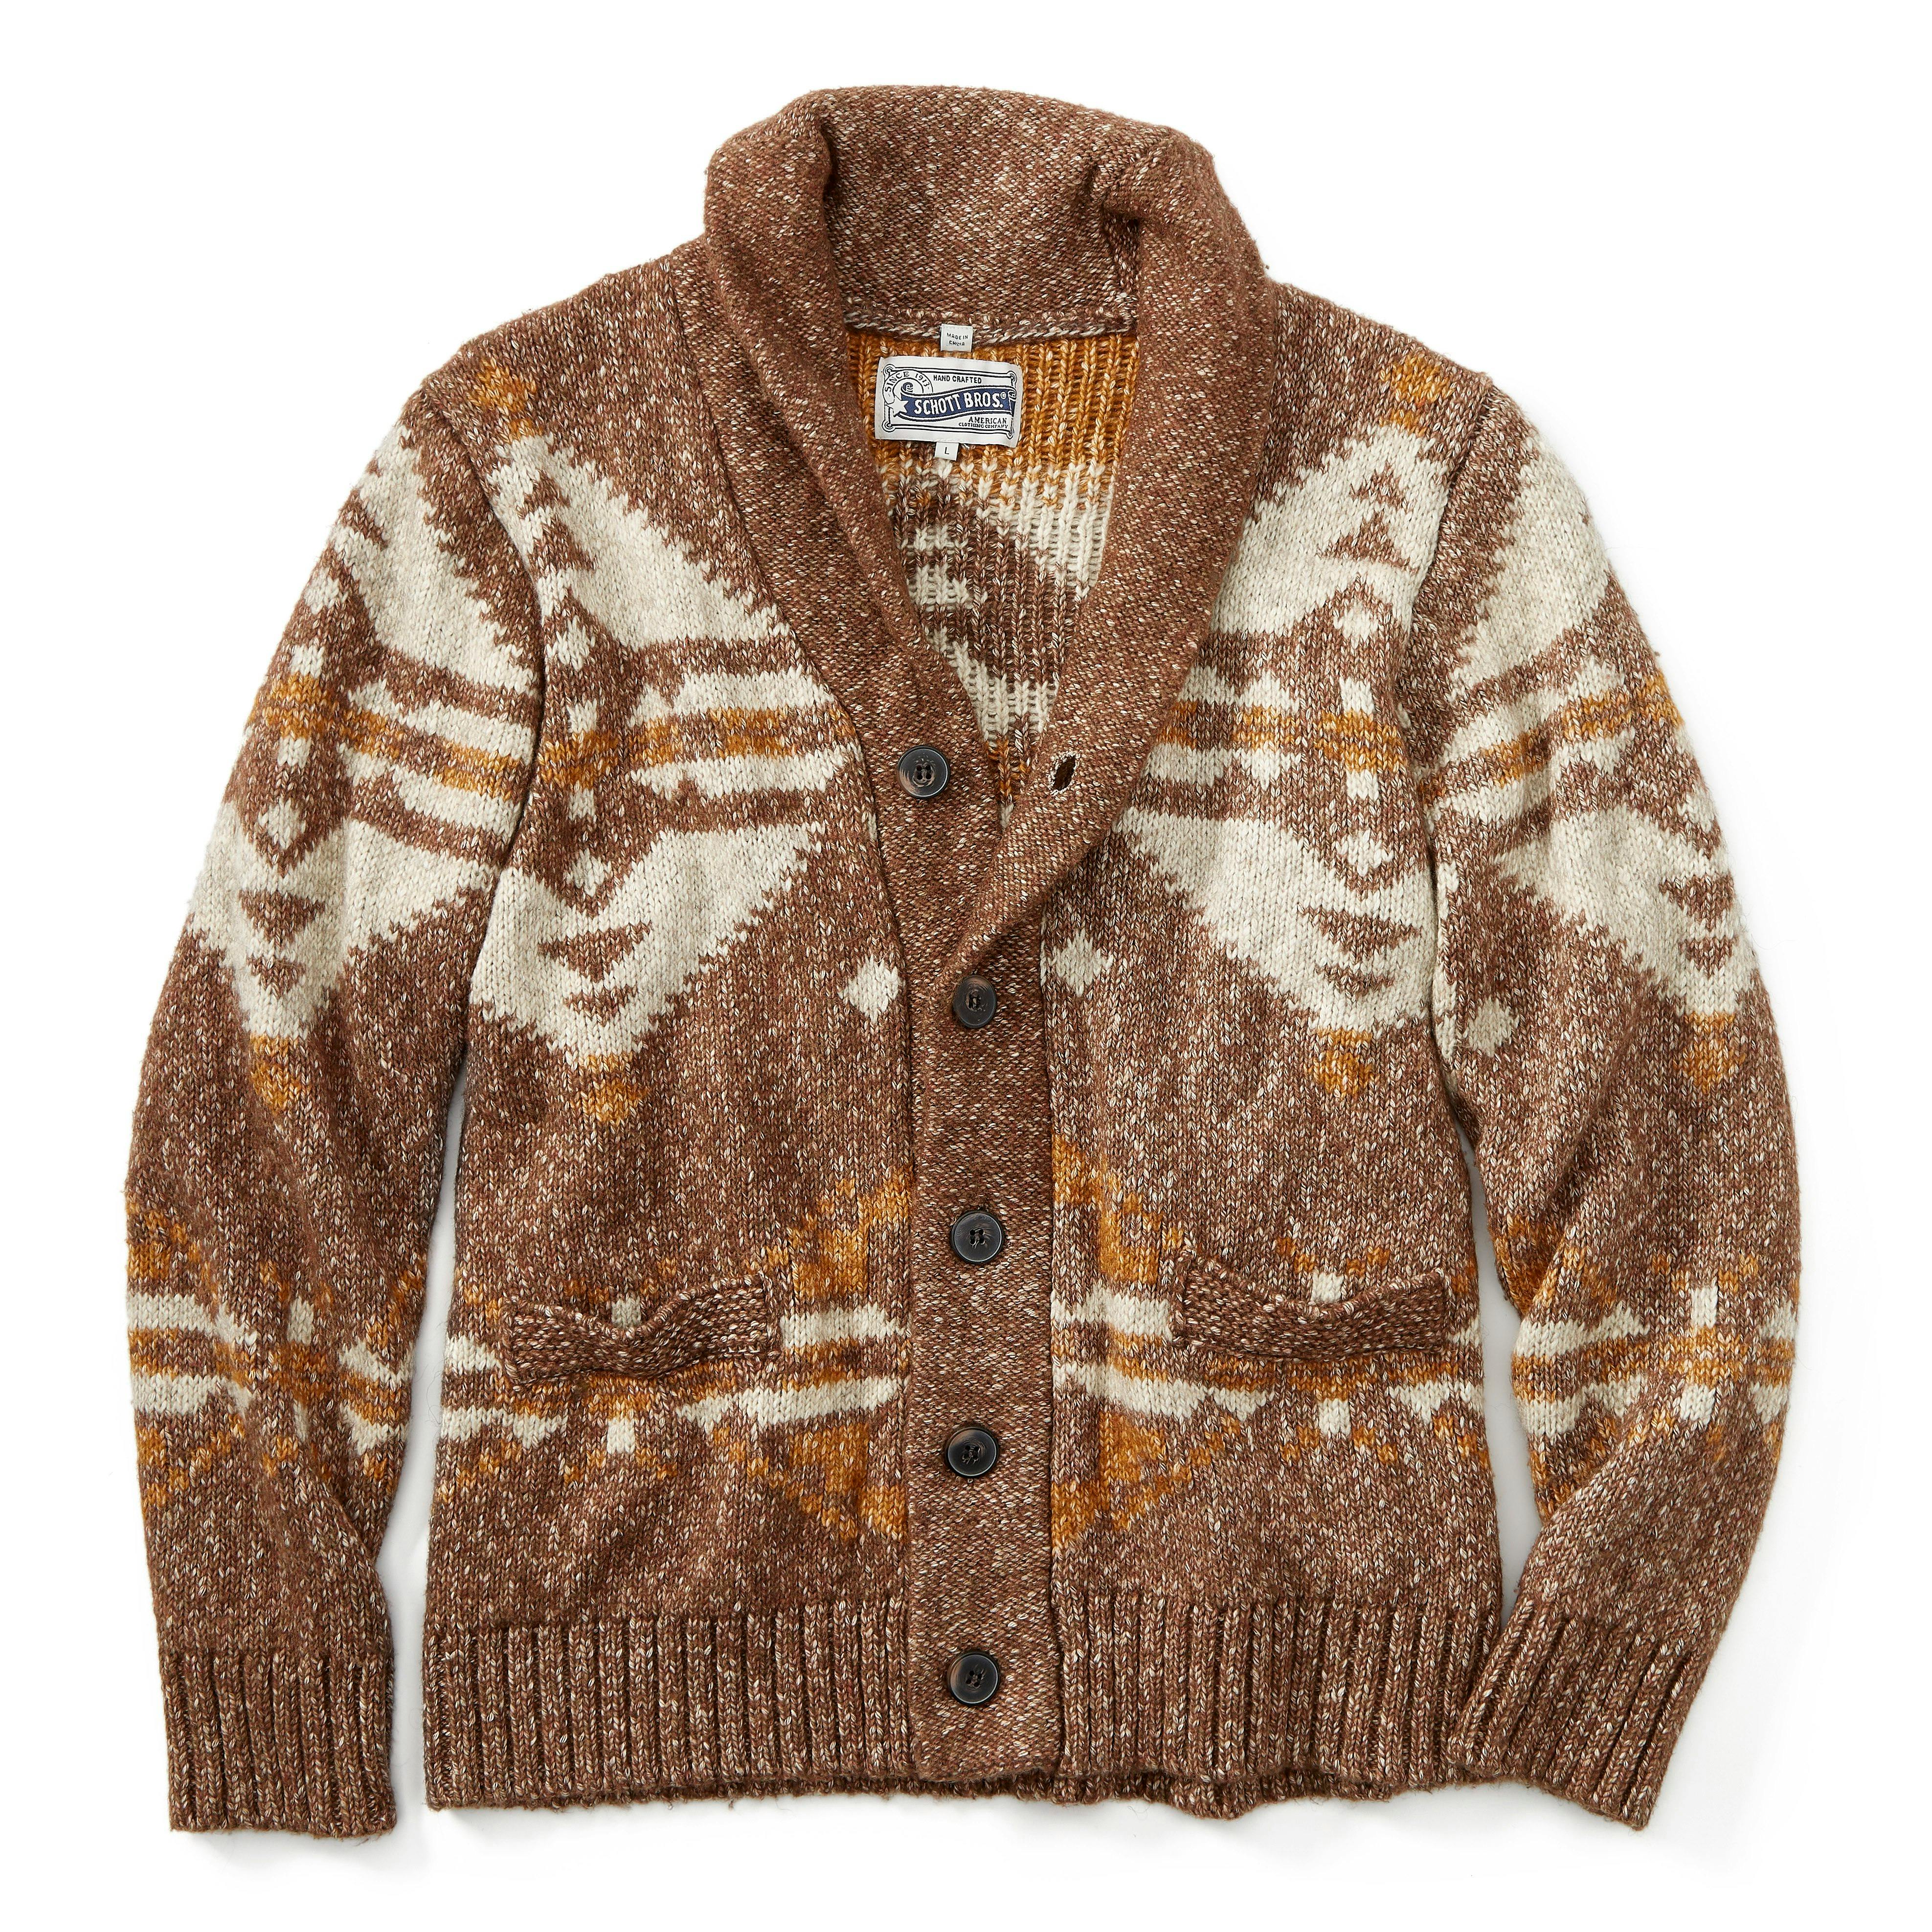 The Motif Cardigan Sweater - Exclusive